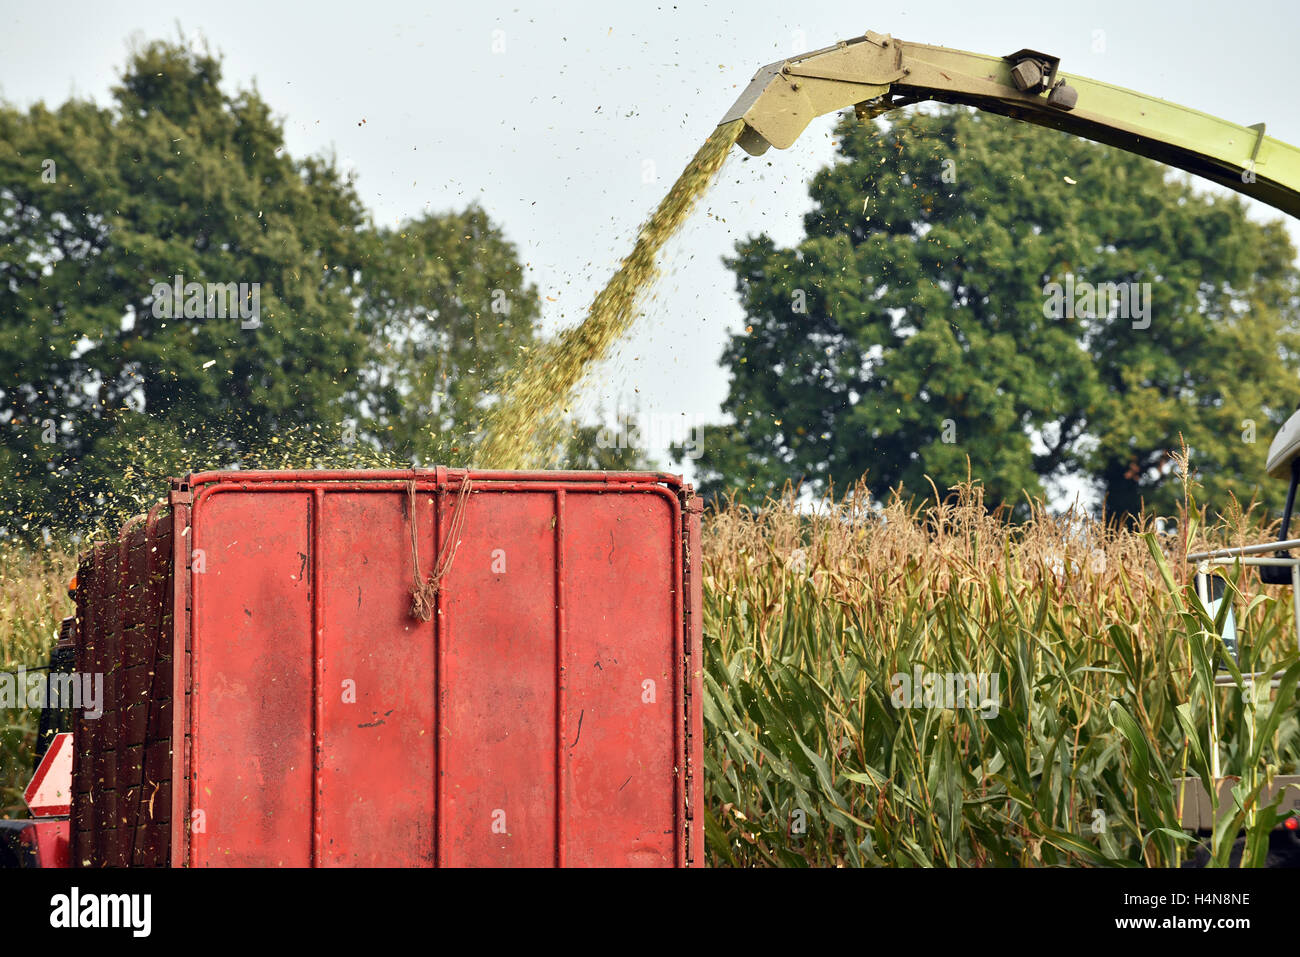 Detail of a forage harvester busy harvesting cultivated fodder maize plants in the autumn season. Stock Photo